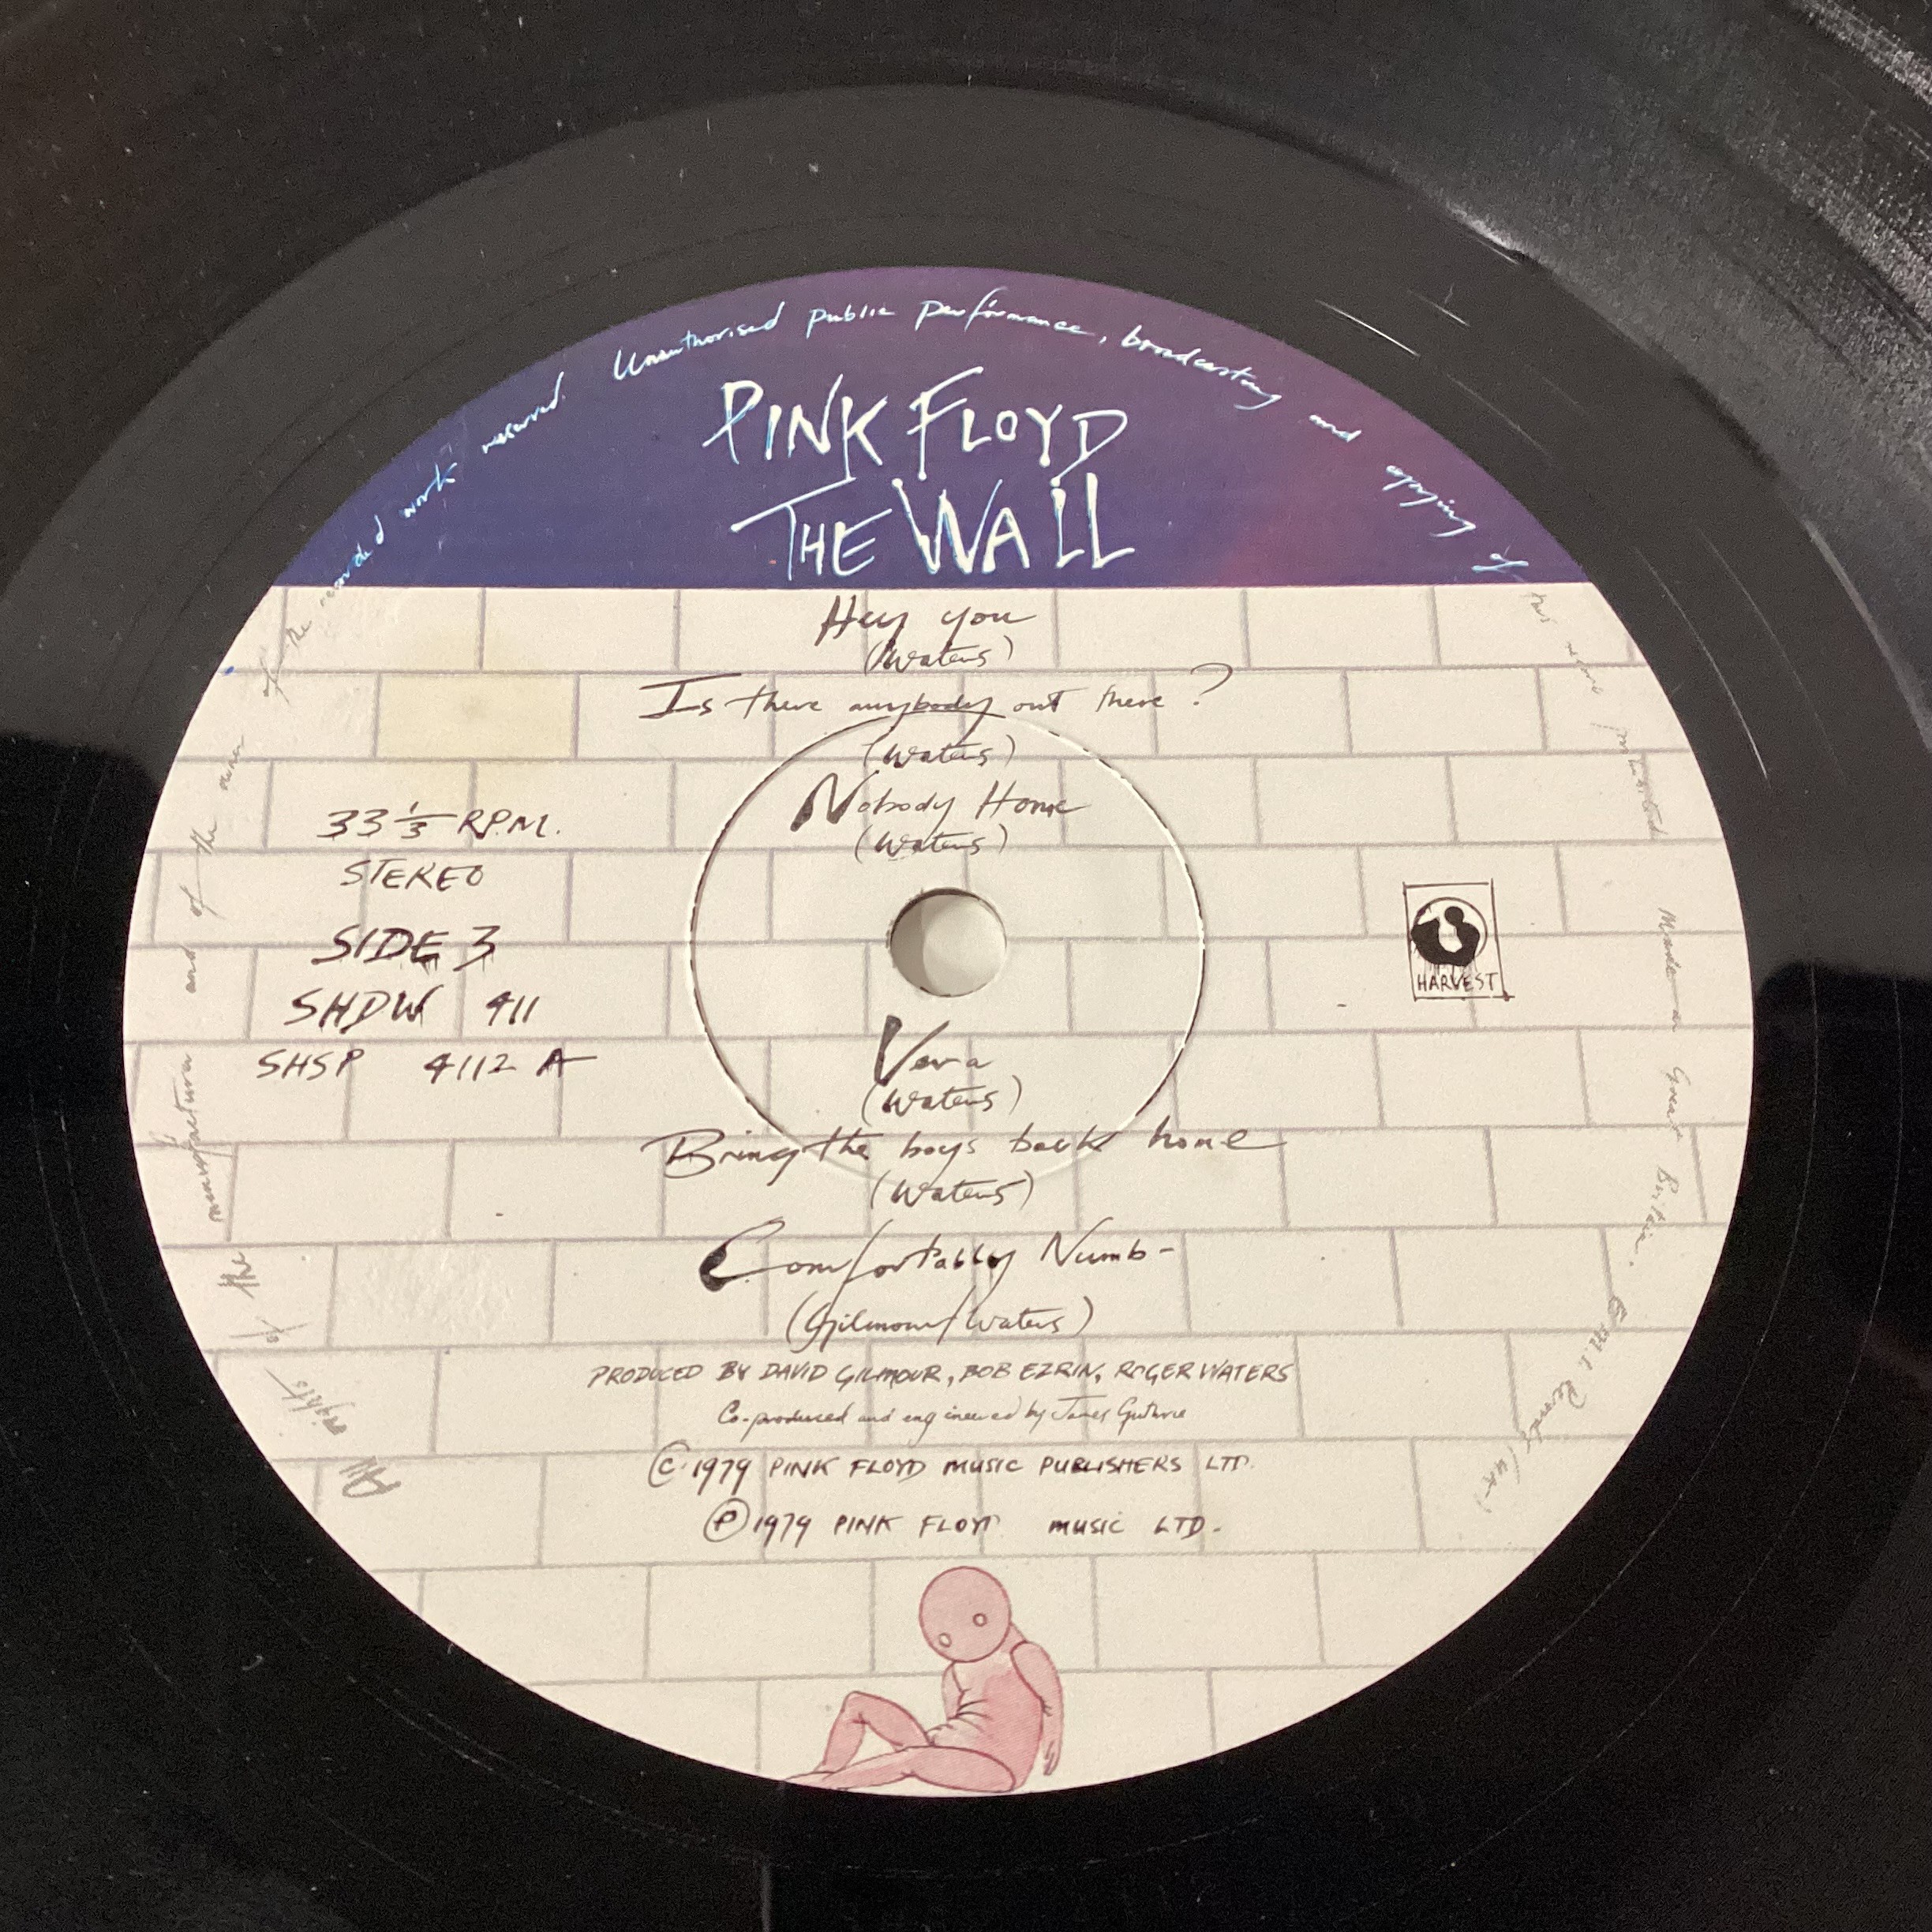 PINK FLOYD VINYL LP RECORDS X 2. Copies here include ‘The Wall’ double album on Harvest SHDW 411 - Bild 5 aus 9